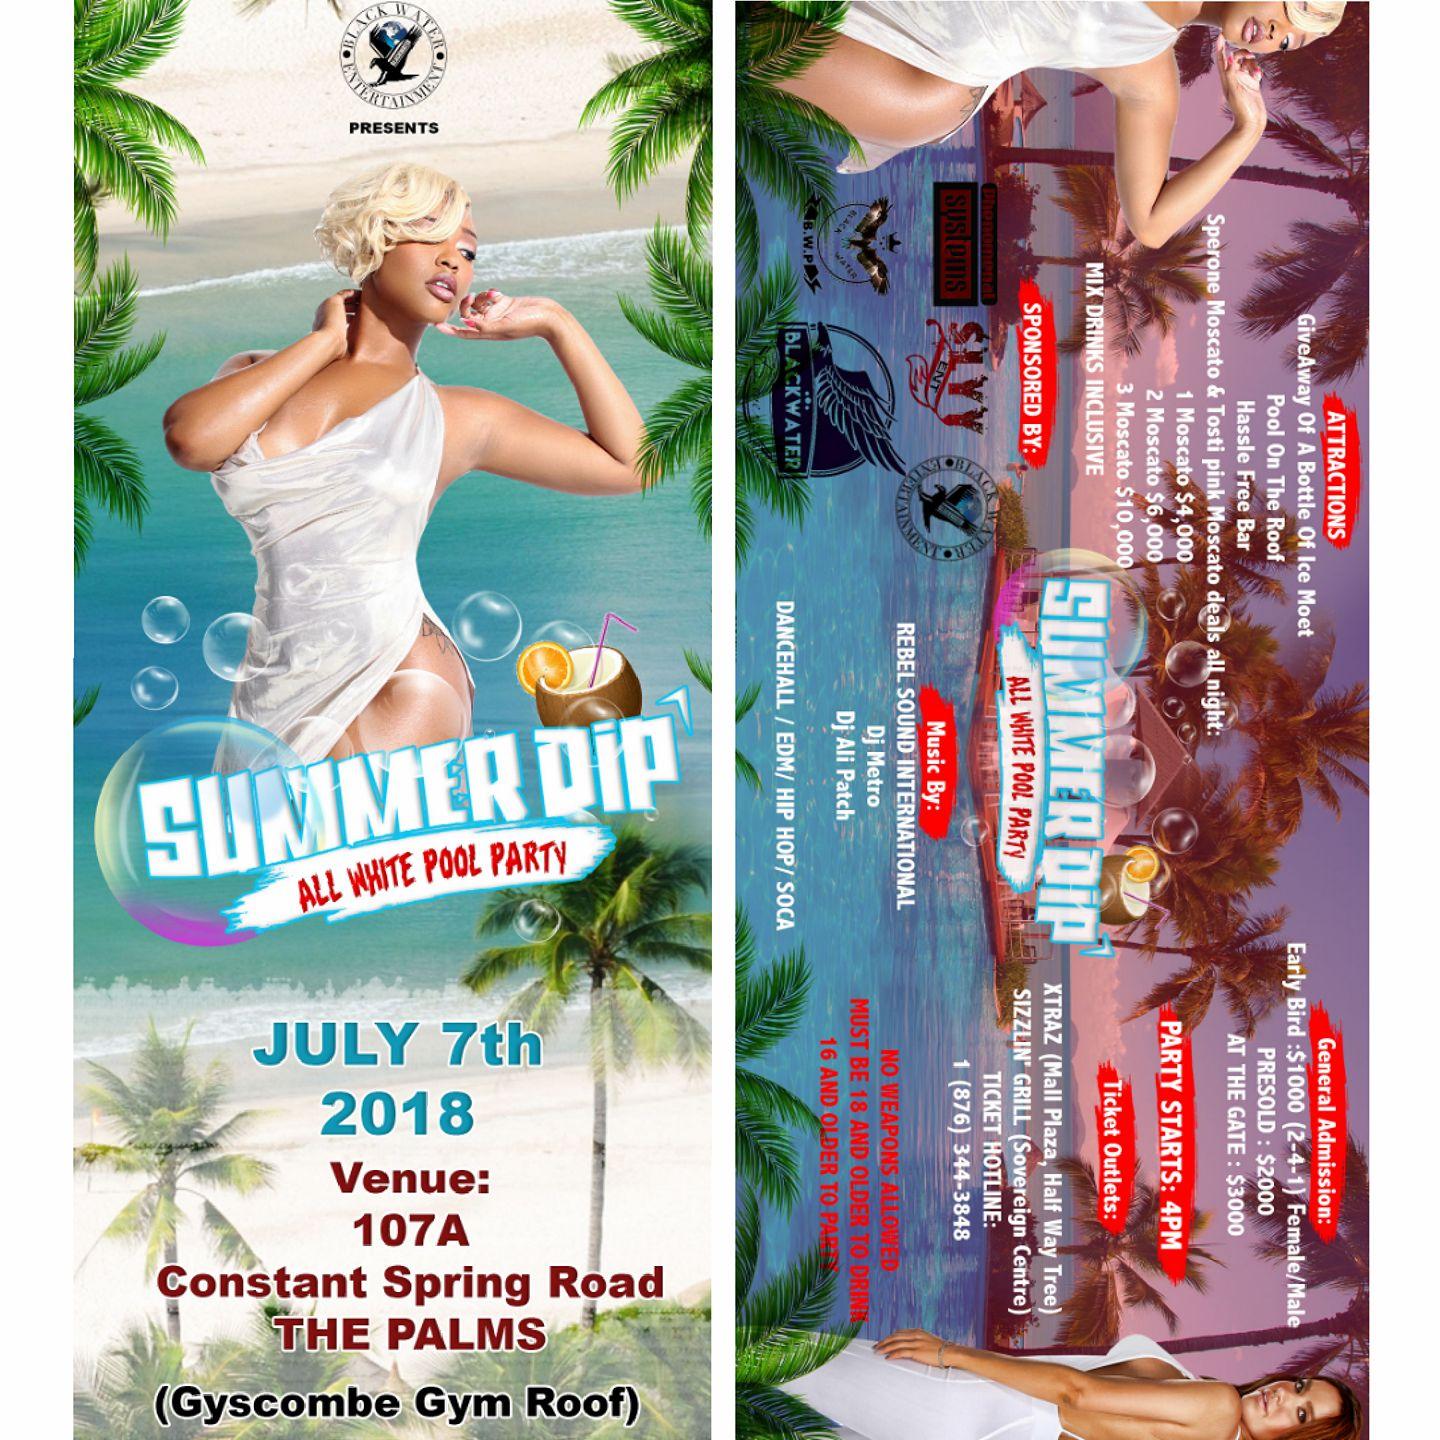 Summer Dip: All White Pool Party